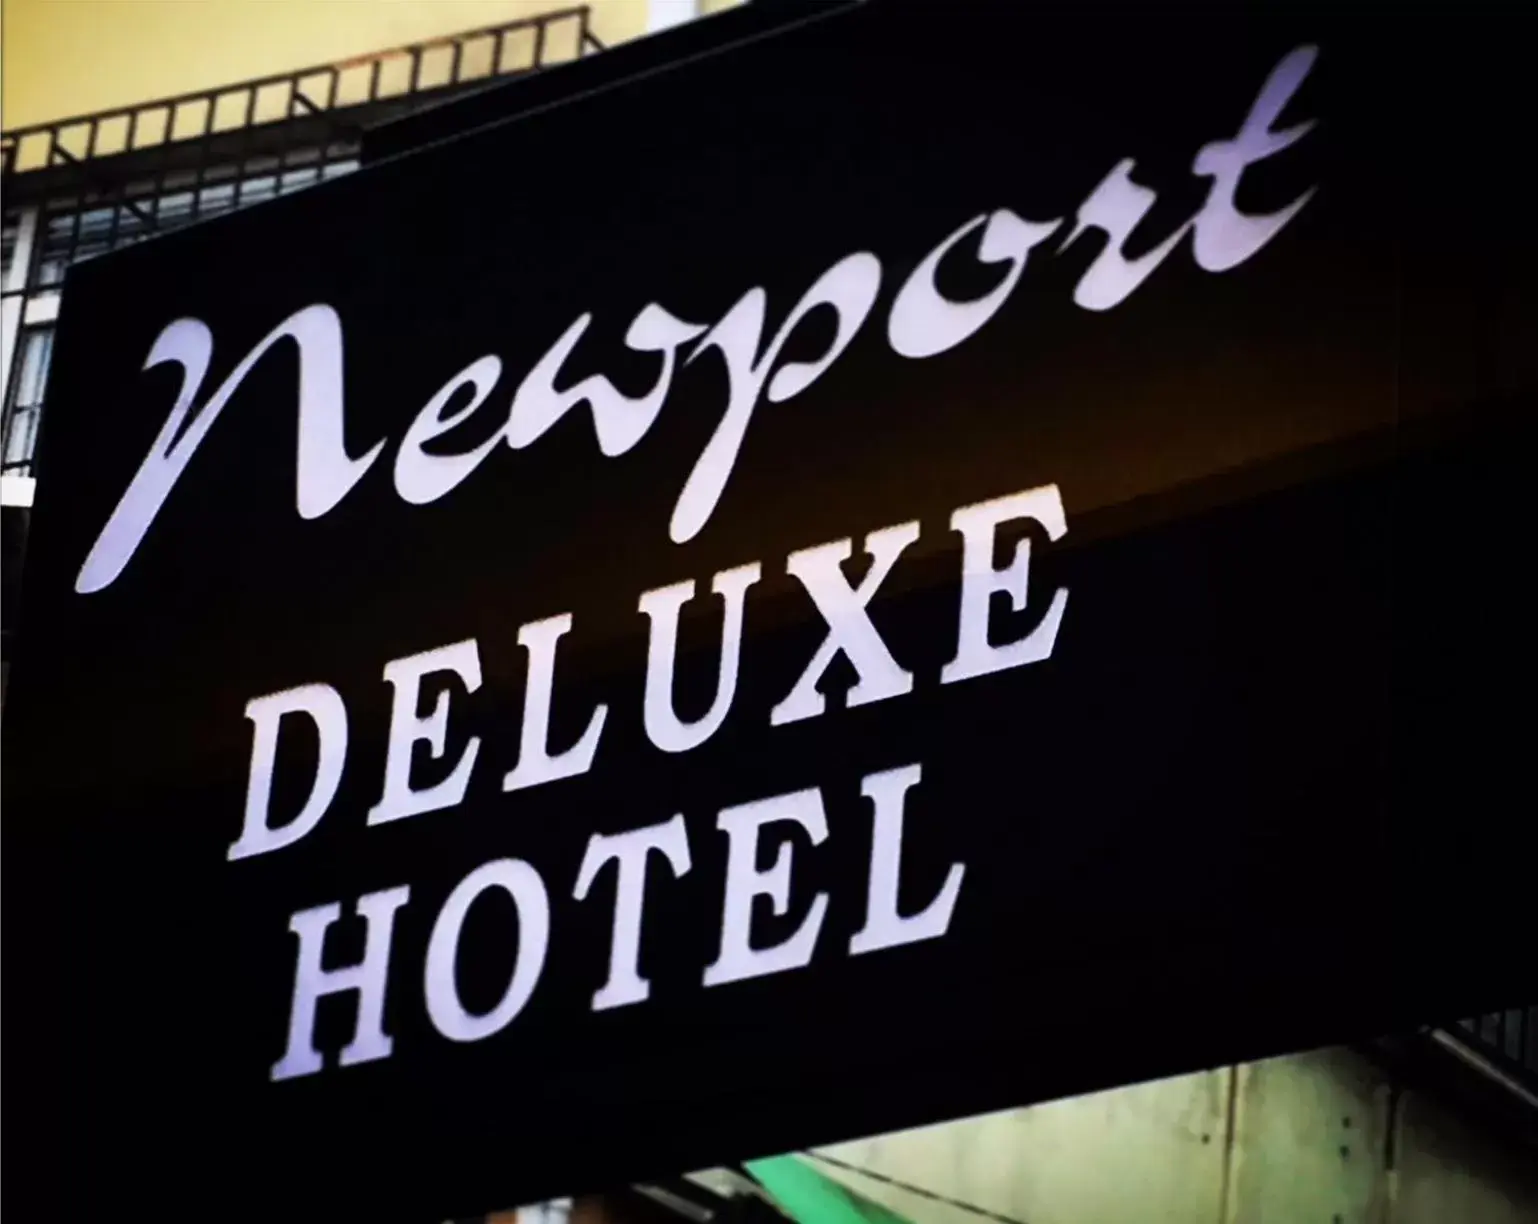 Property logo or sign in Deluxe Newport Hotel